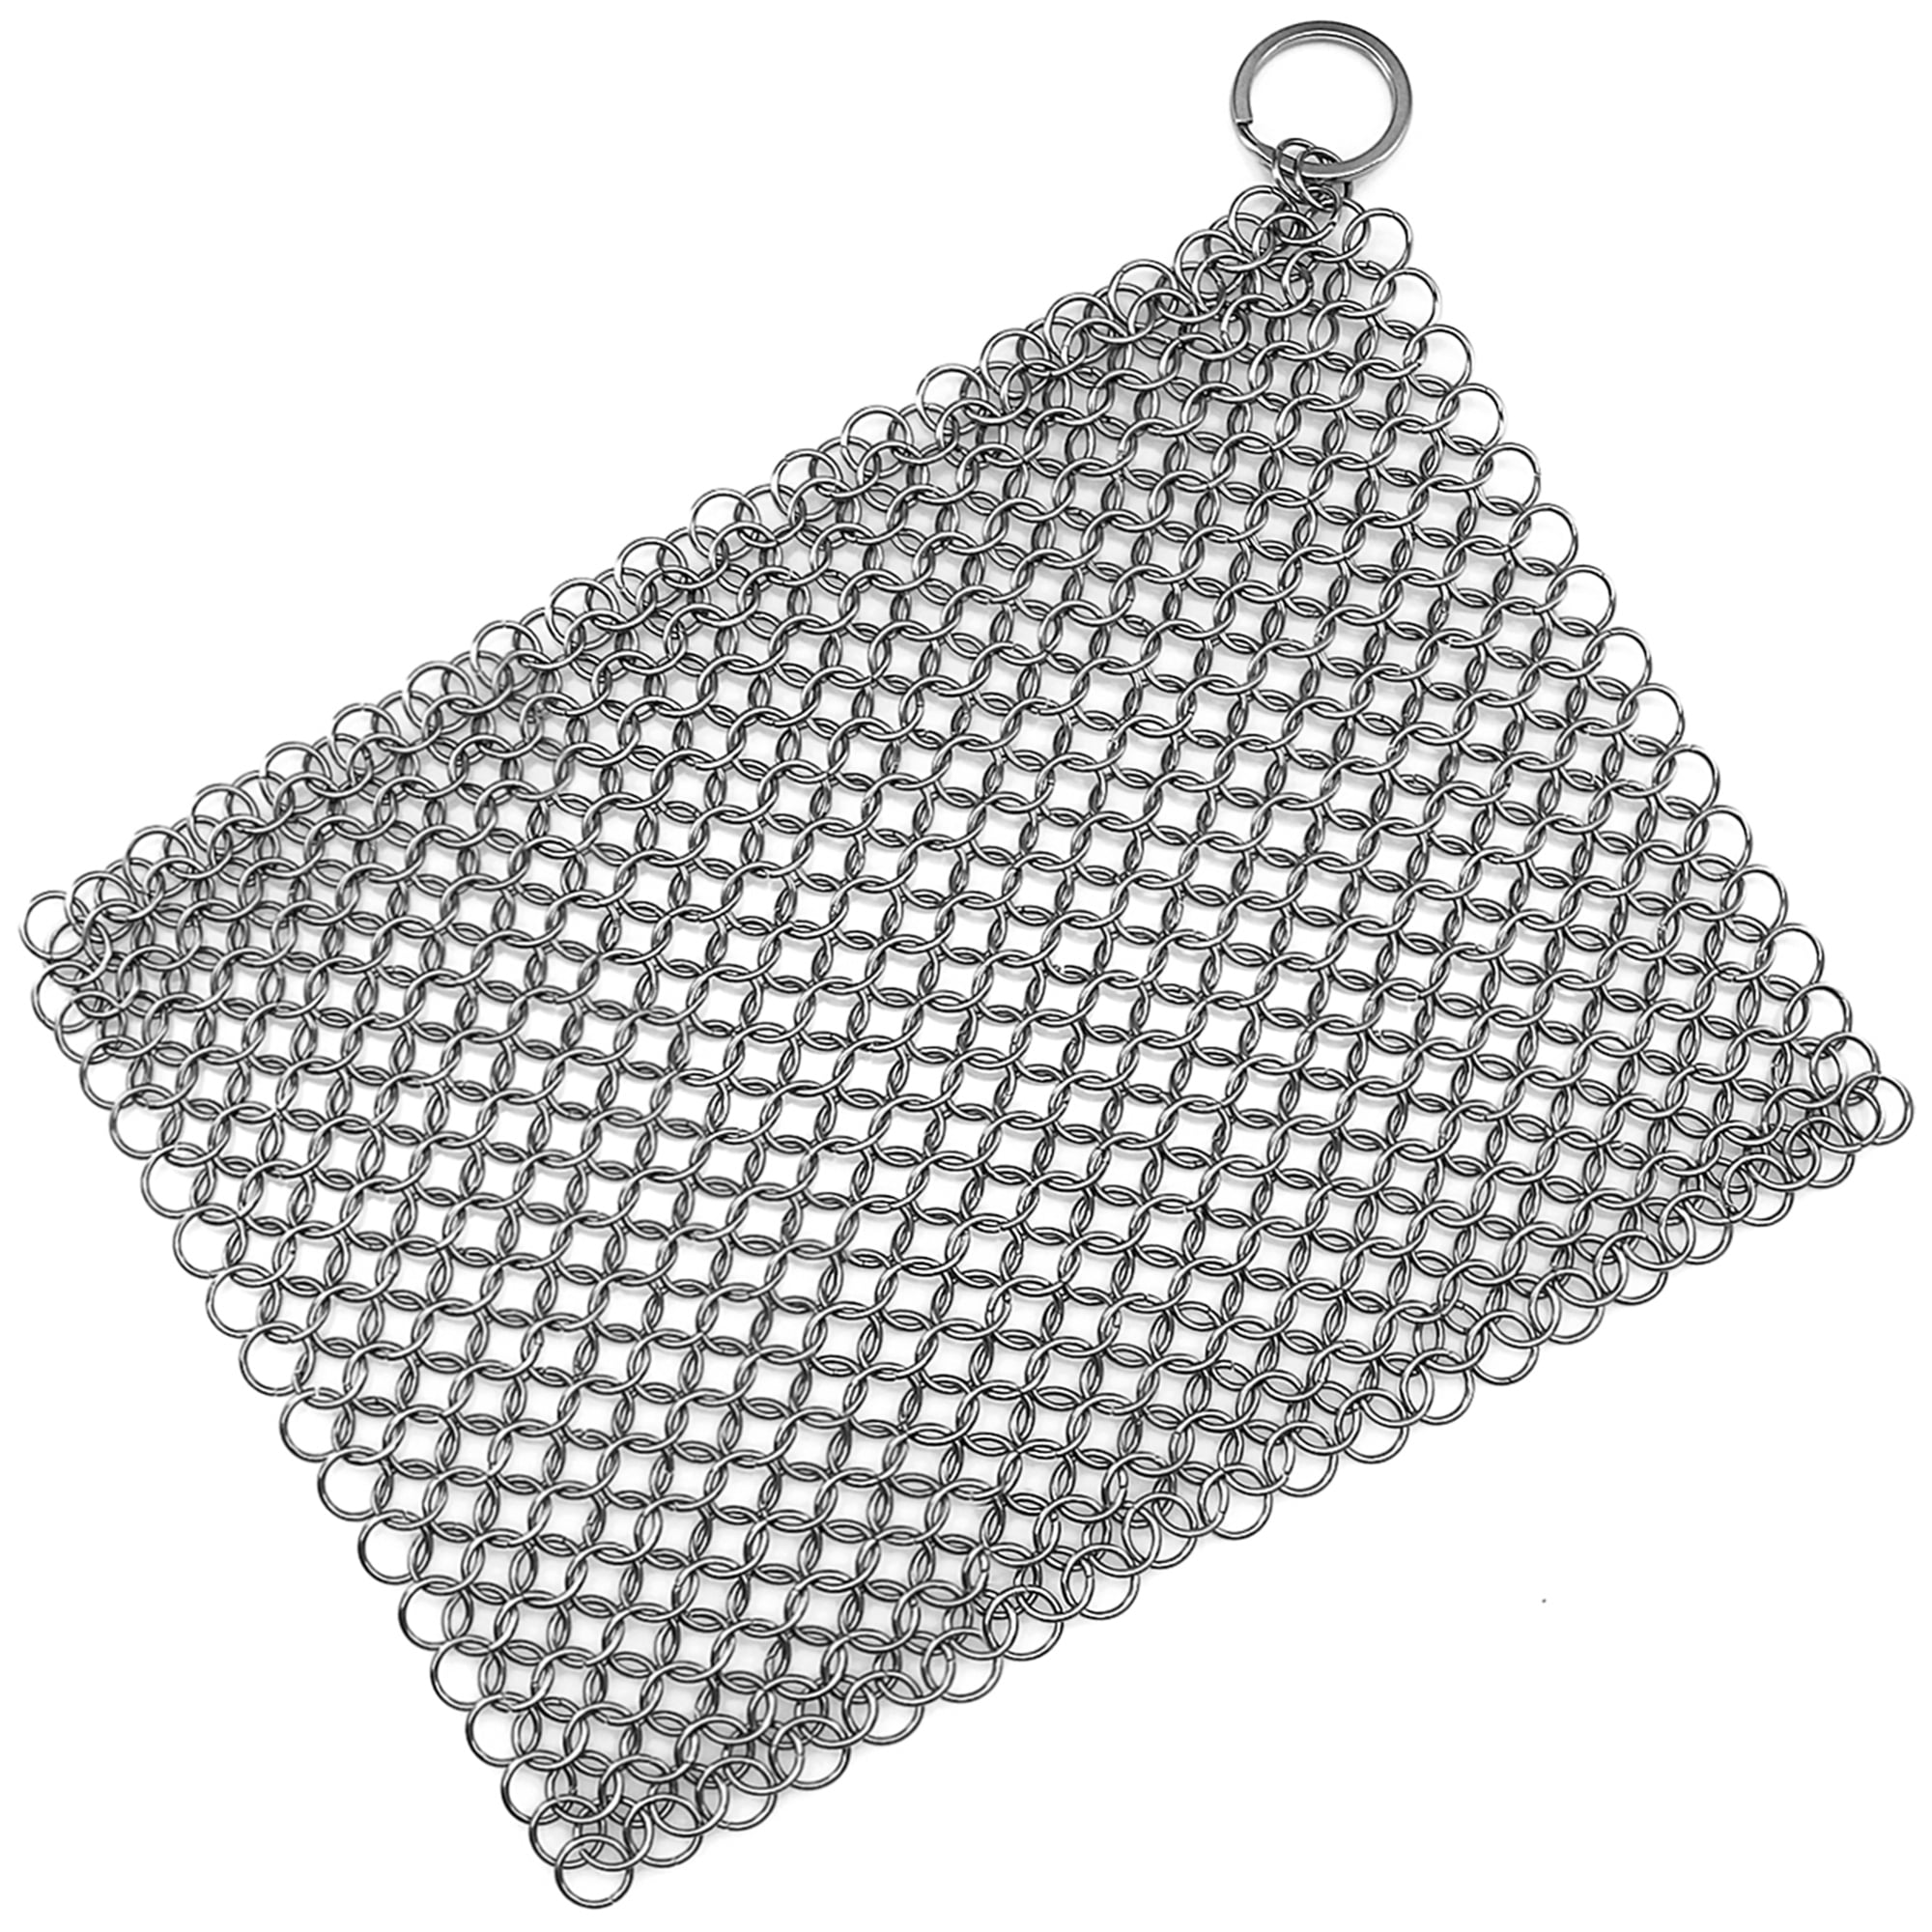 Cast Iron Skillet Cleaner, 316 Stainless Steel Chainmail Cleaning Scrubber  with Silicone Insert for Cleaning Castiron Pan,Griddle,Baking Pan